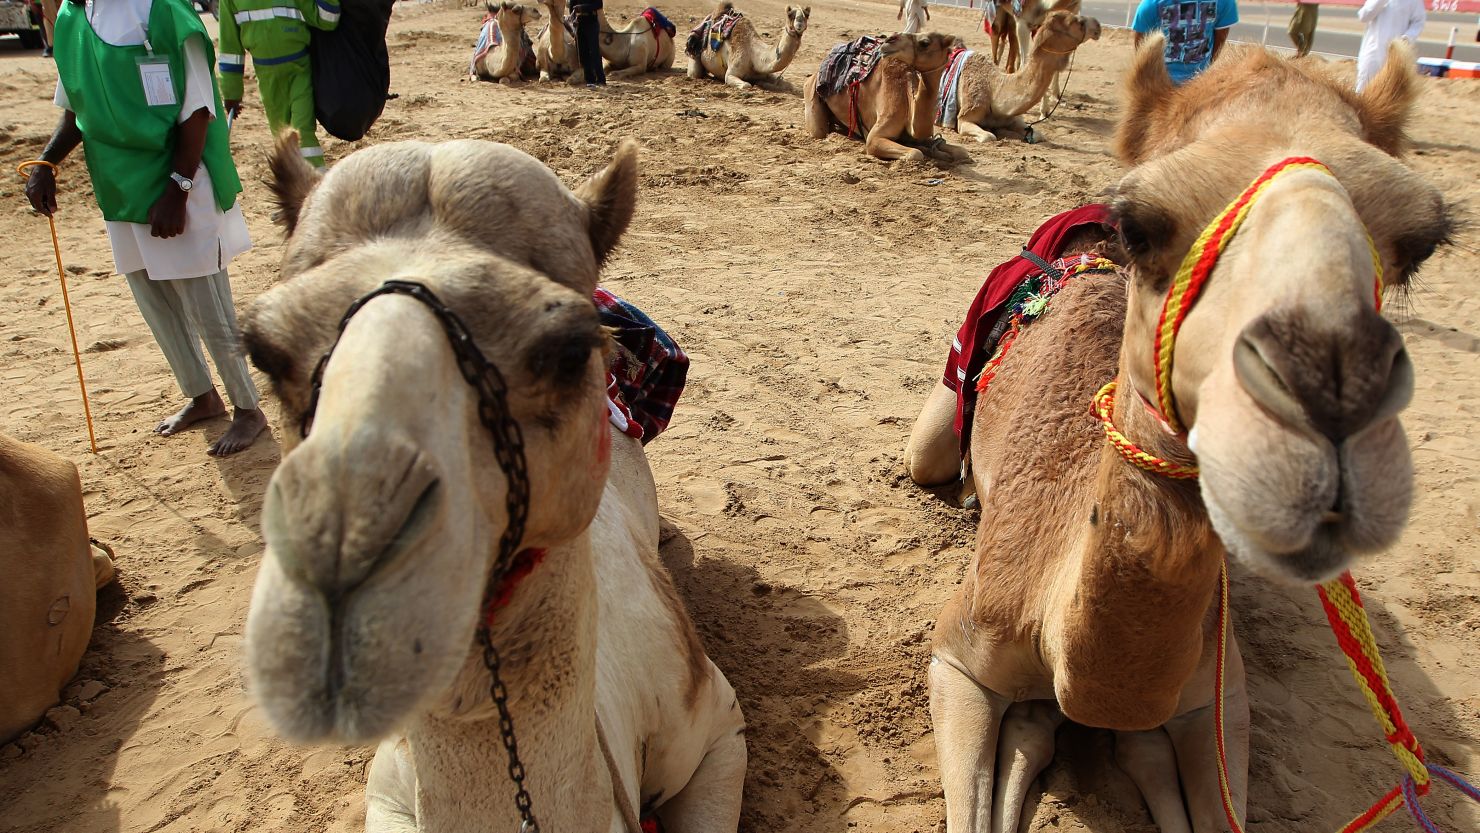 Camels at the Sheikh Sultan Bin Zayed Al-Nahyan Camel Festival on the outskirts of Abu Dhabi on February 16, 2012. 